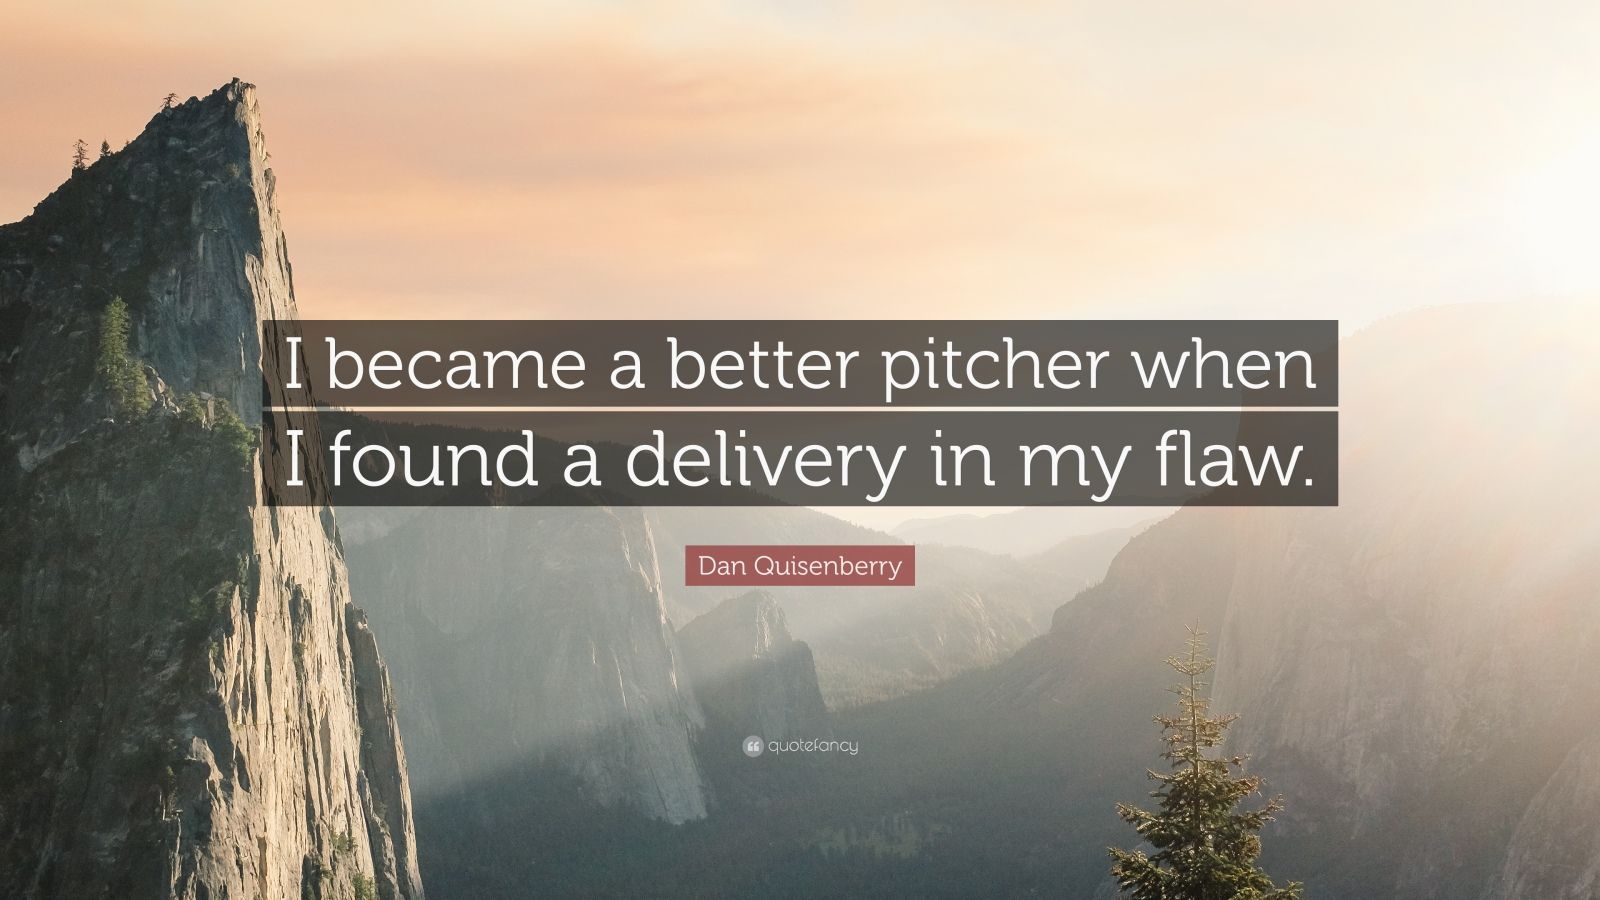 Top 10 Dan Quisenberry Quotes | 2021 Edition | Free Images - QuoteFancy